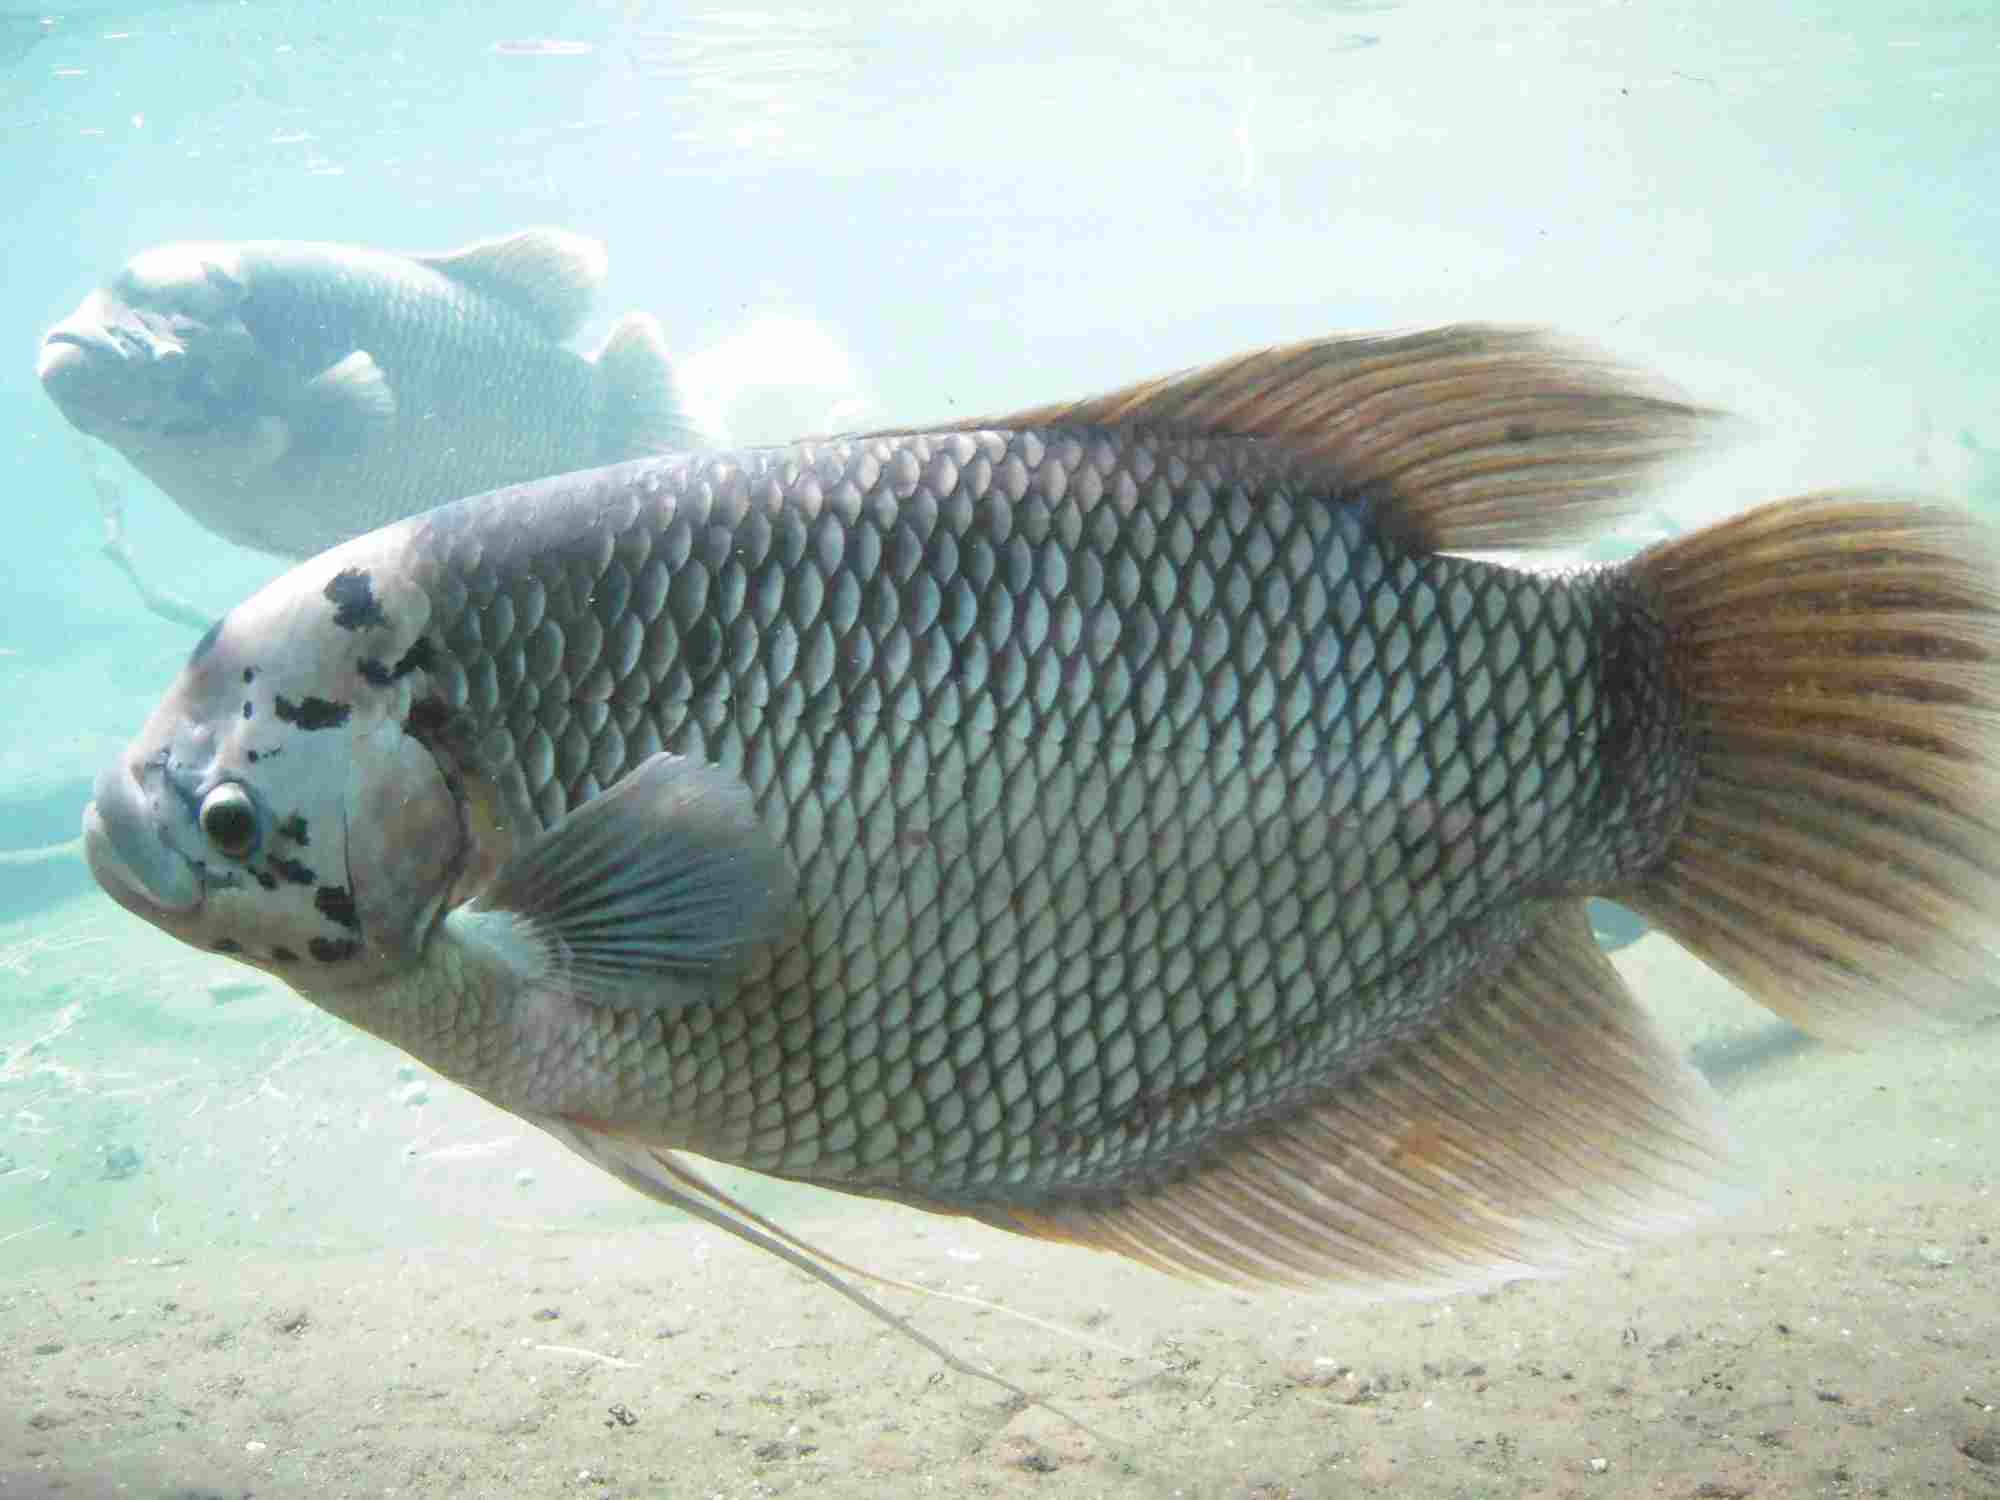 The giant gourami is a freshwater fish species